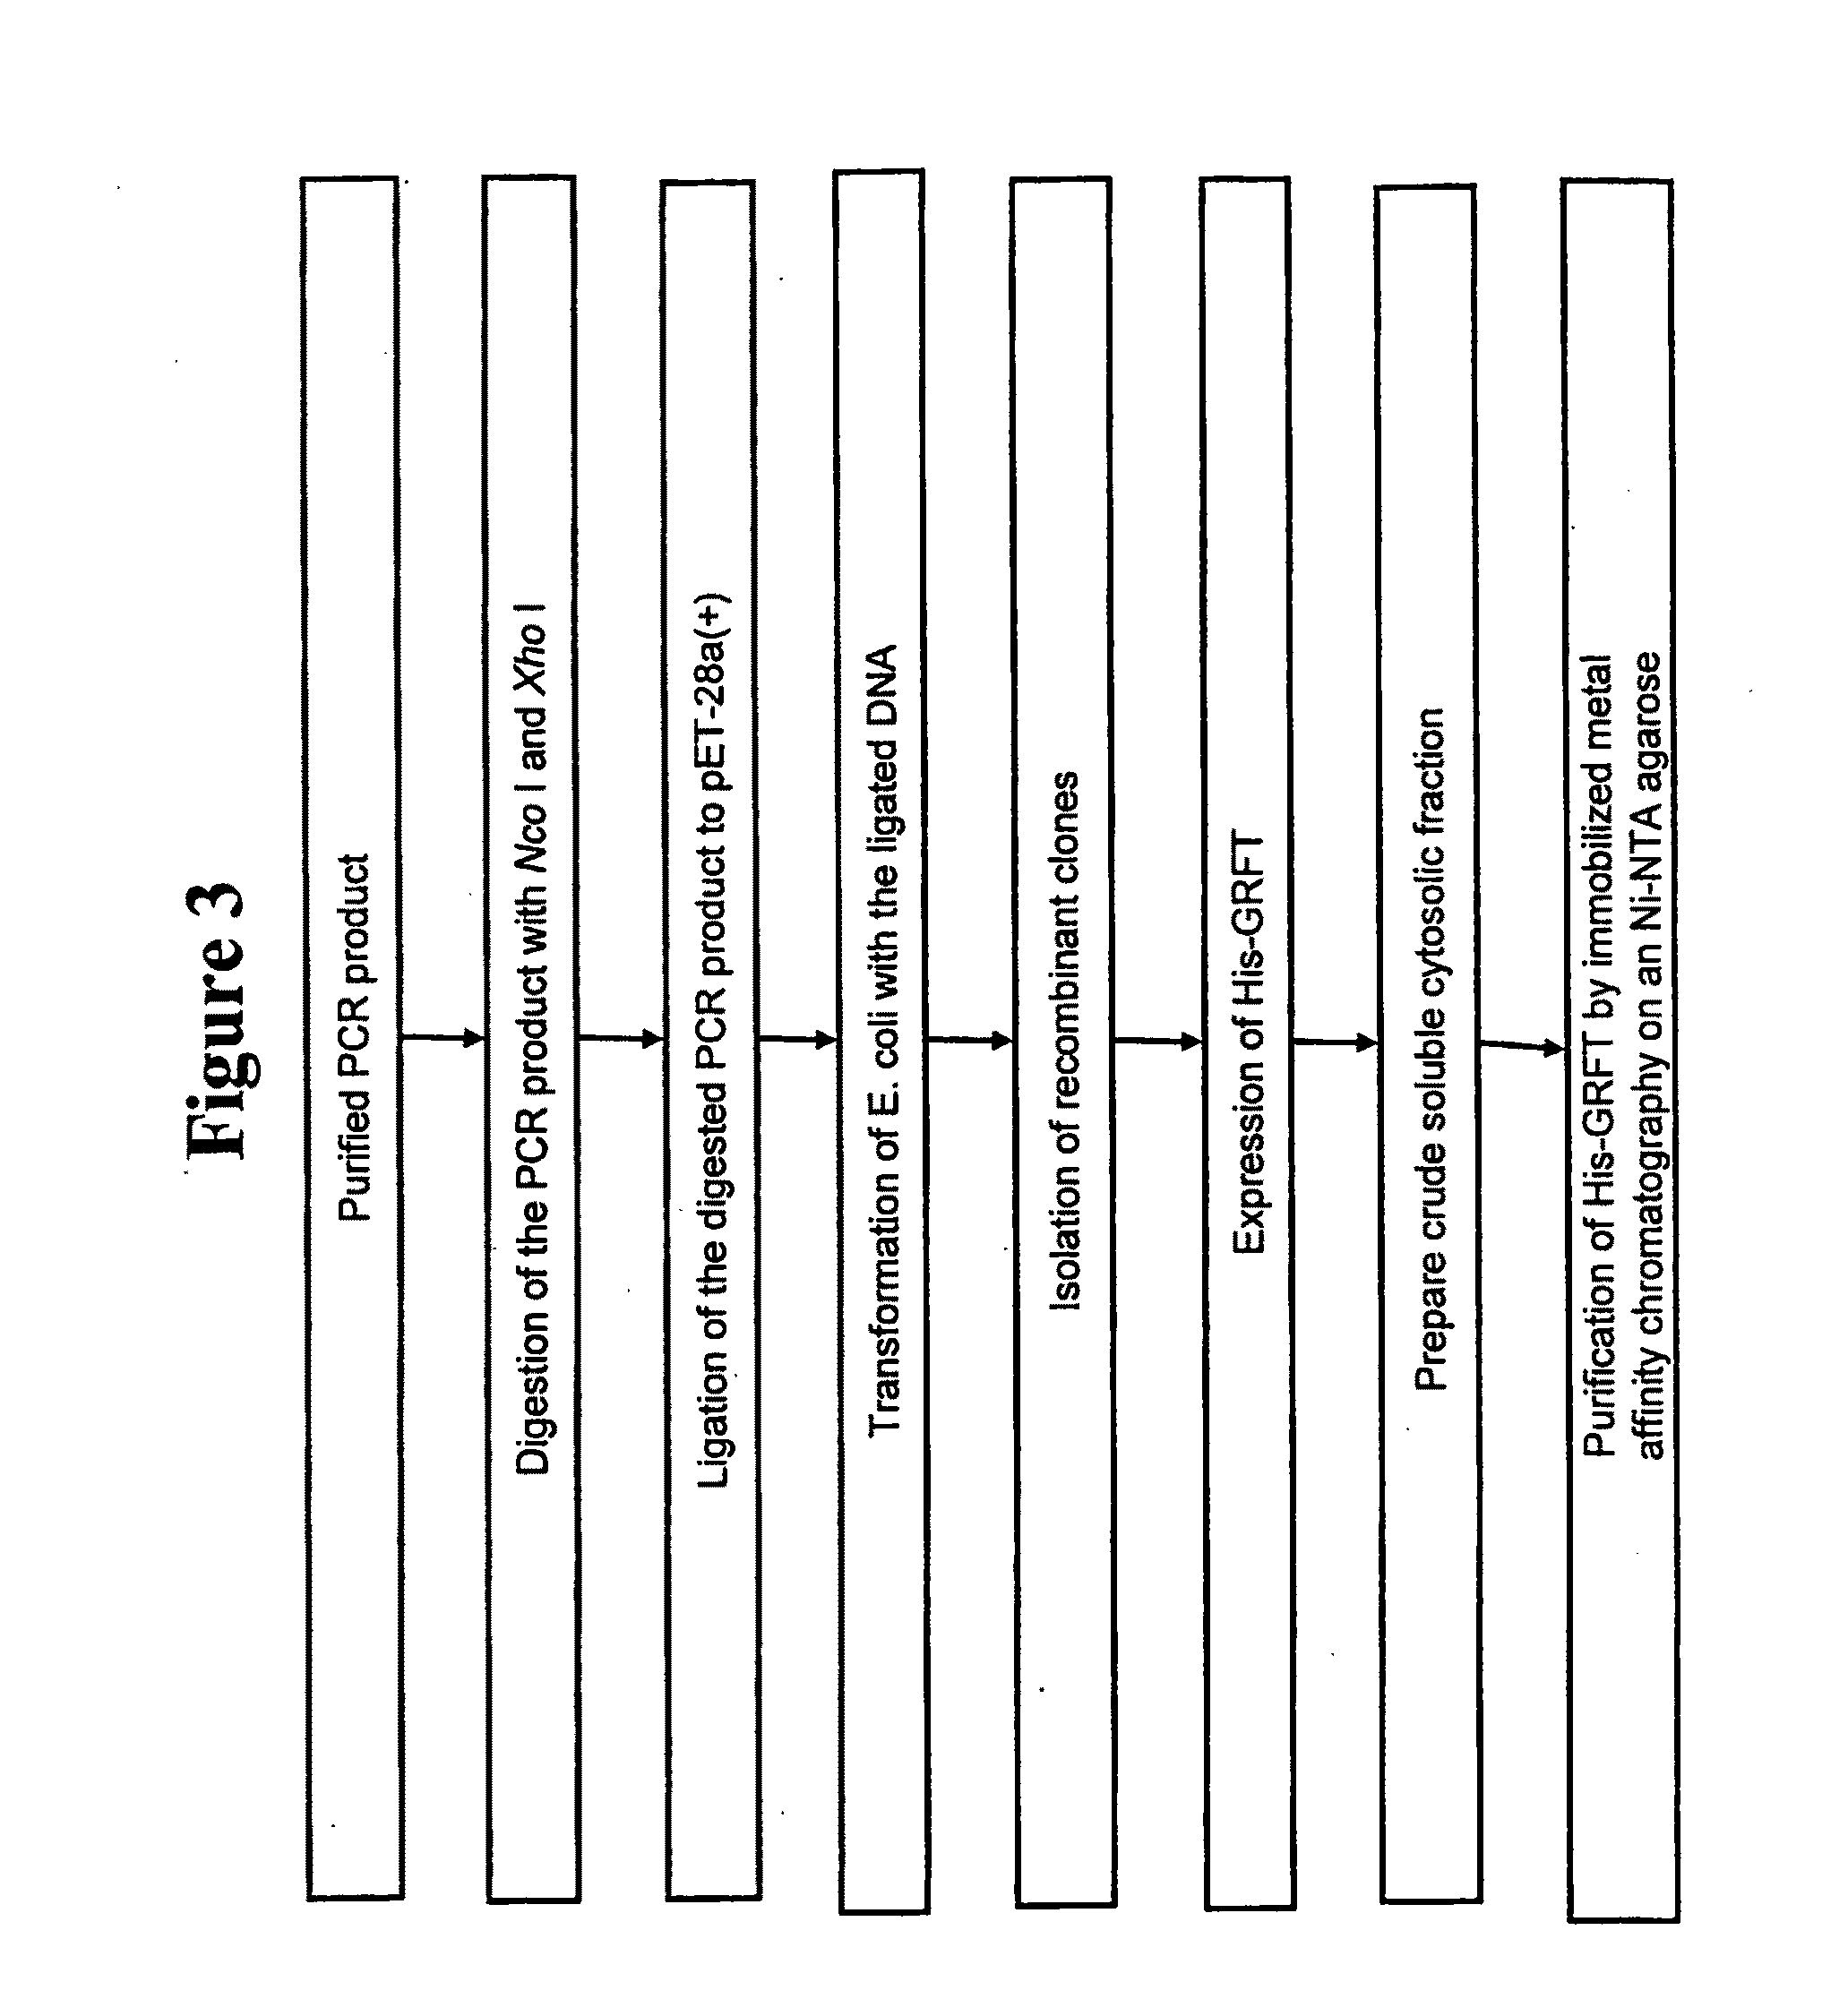 Griffithsin, glycosylation-resistant griffithsin, and related conjugates, compositions, nucleic acids, vectors, host cells, methods of production and methods of use